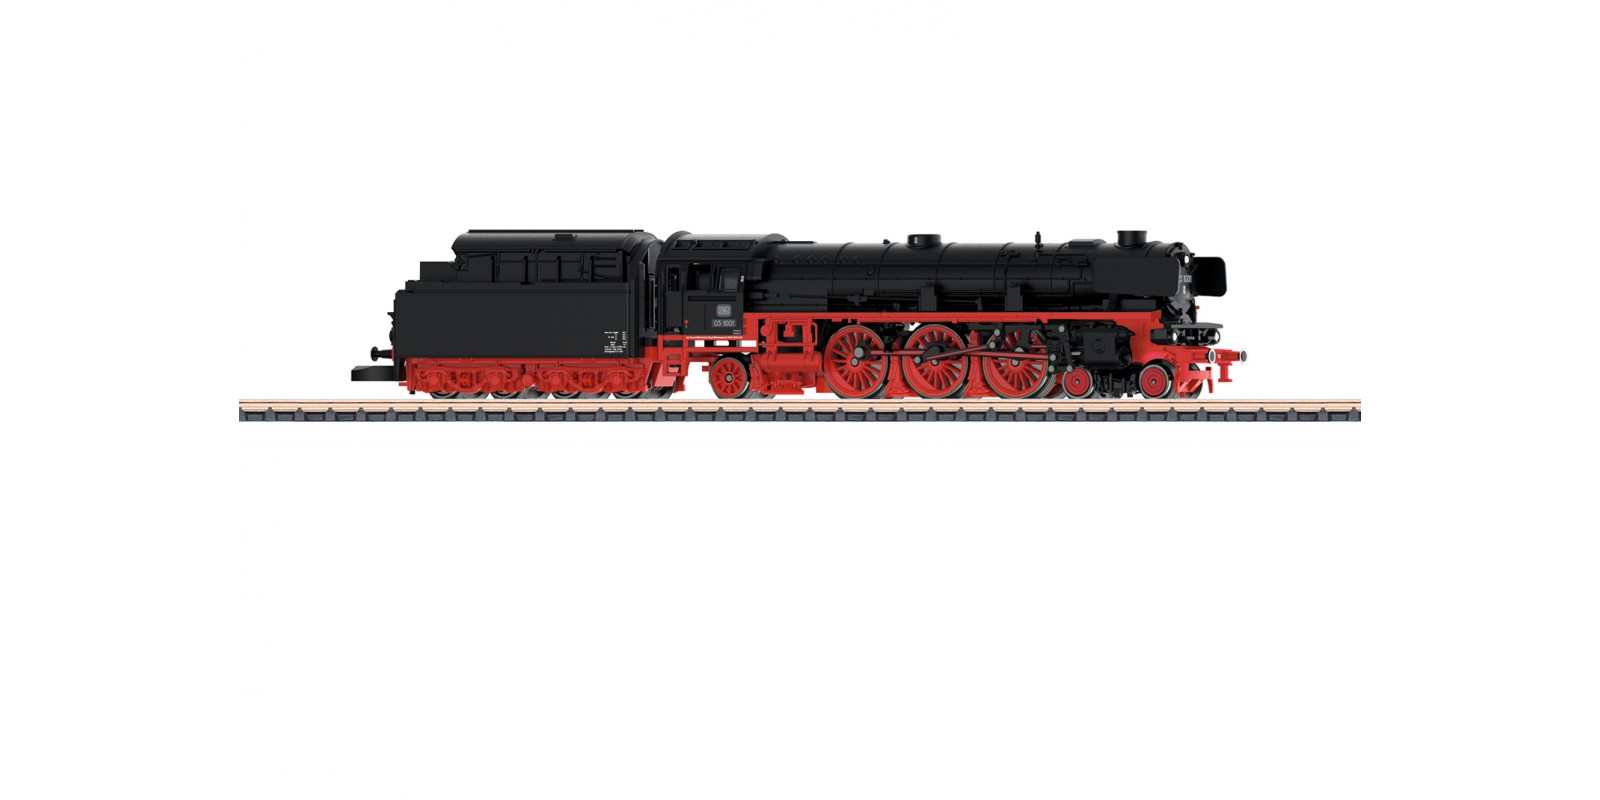 88850 Class 03.10 Express Locomotive with a Tender